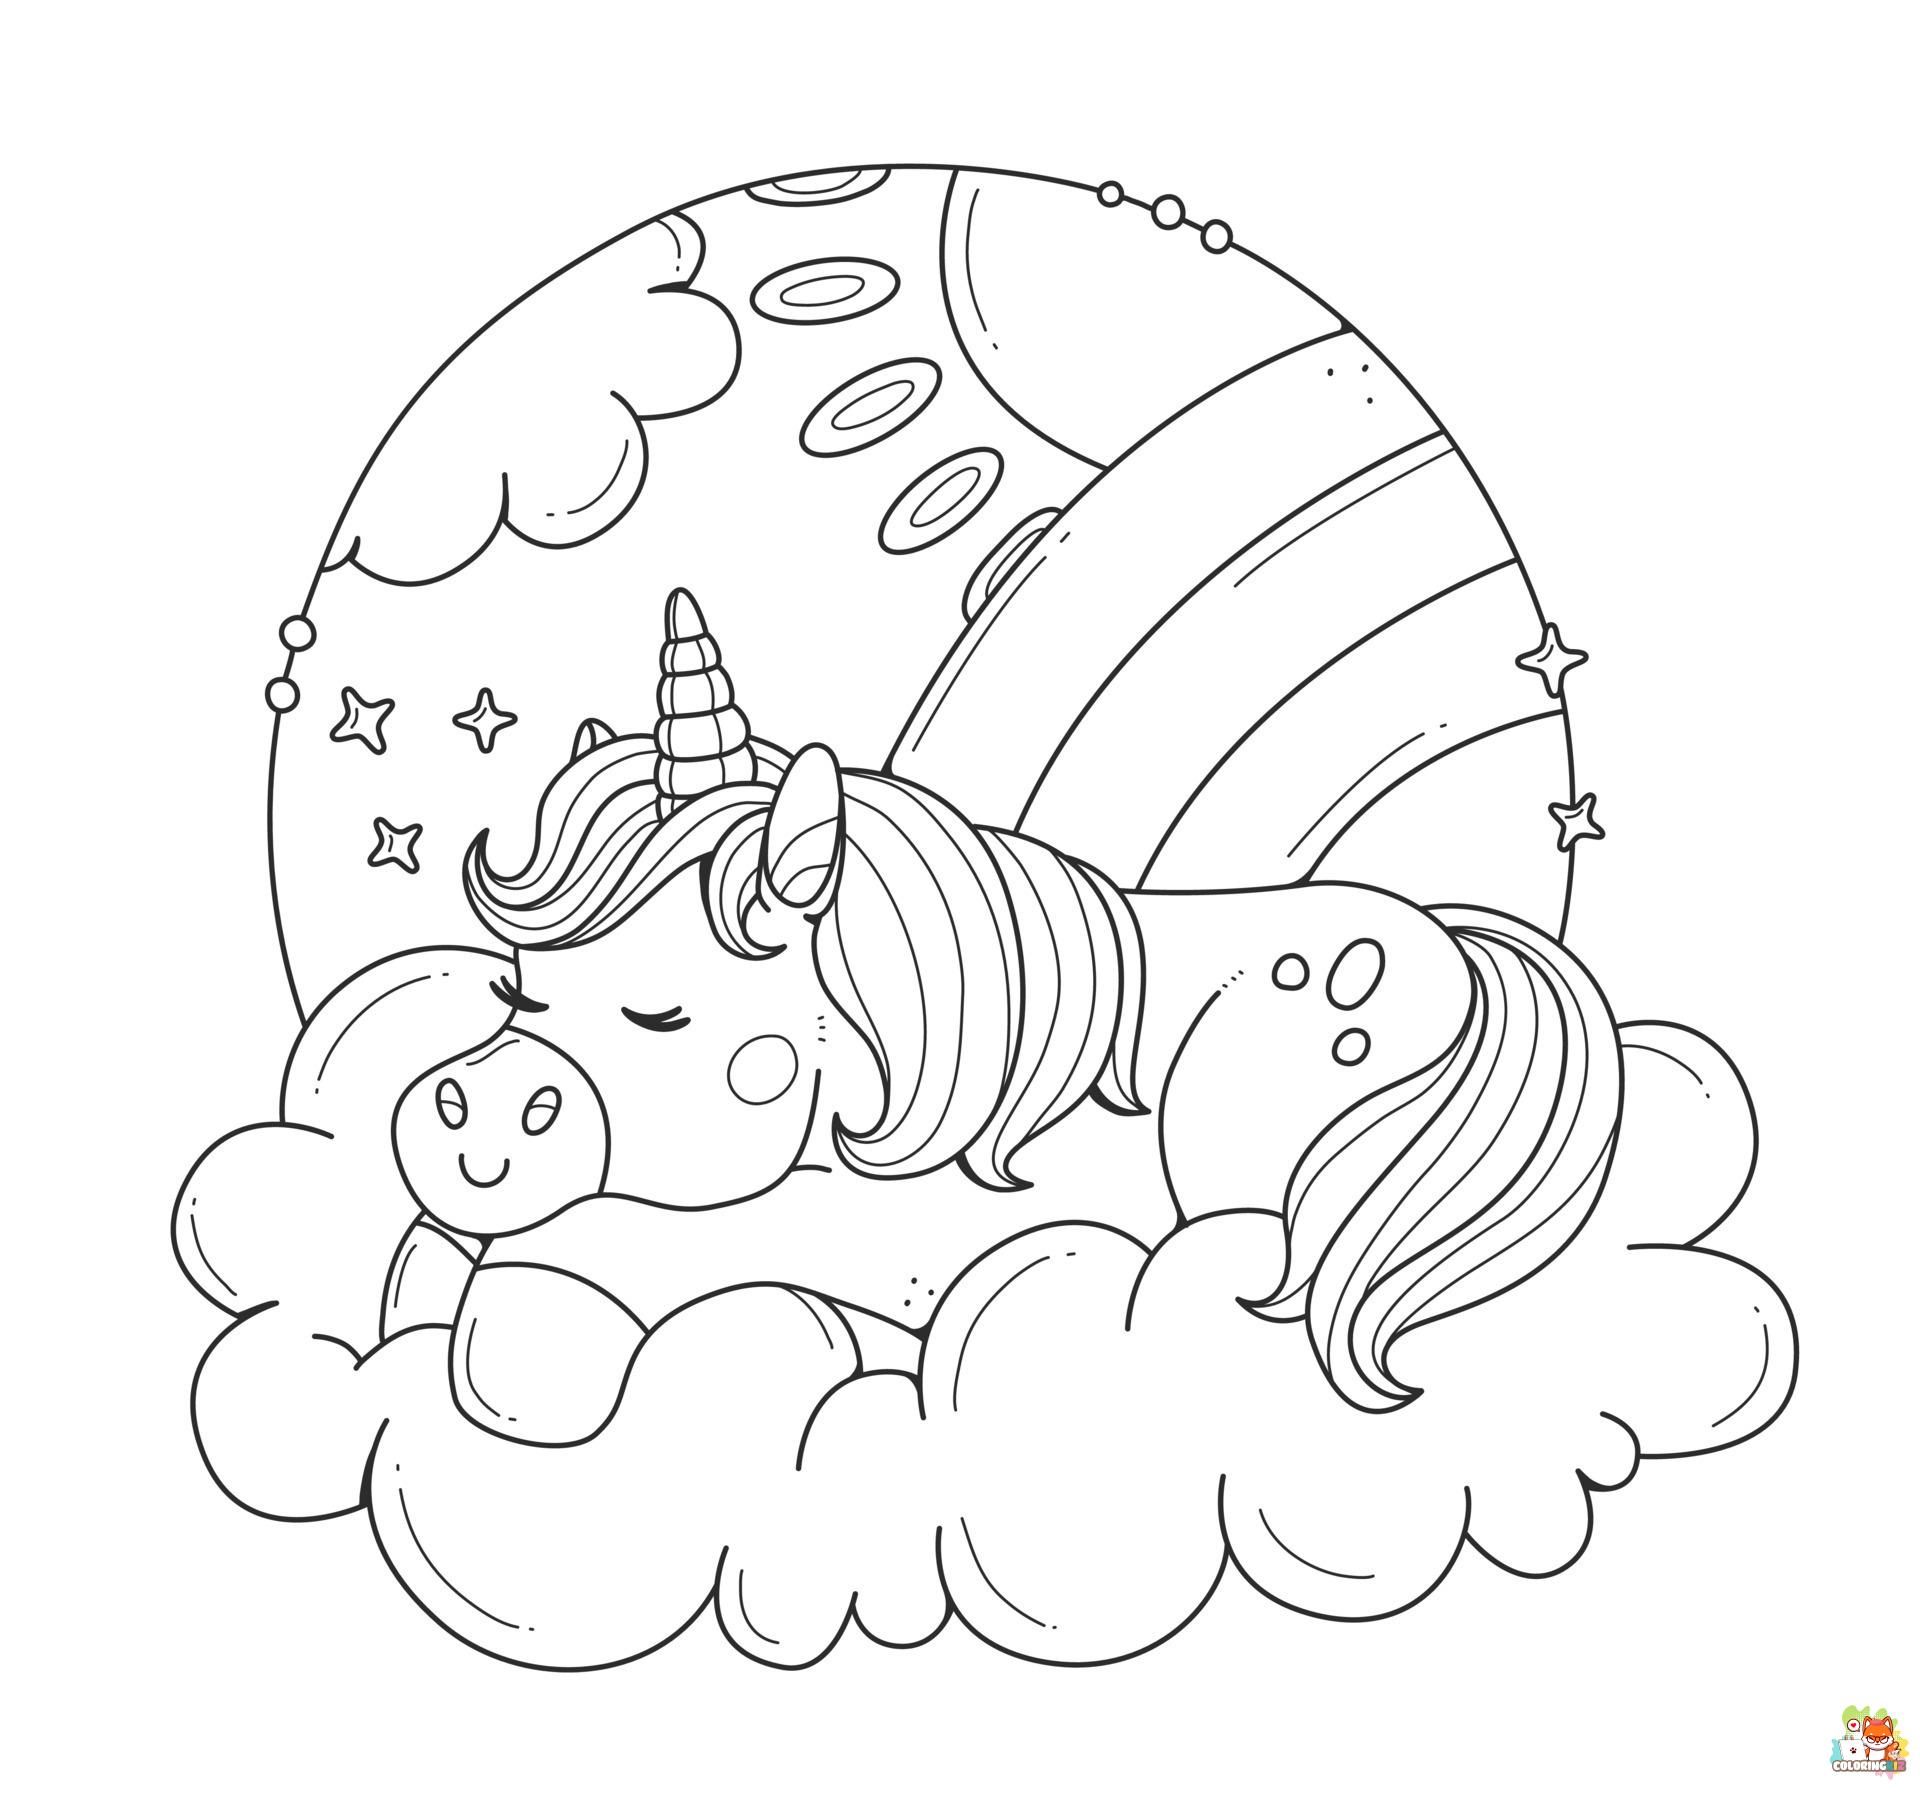 Unicorn Sleeping In The Cloud Coloring Pages 2